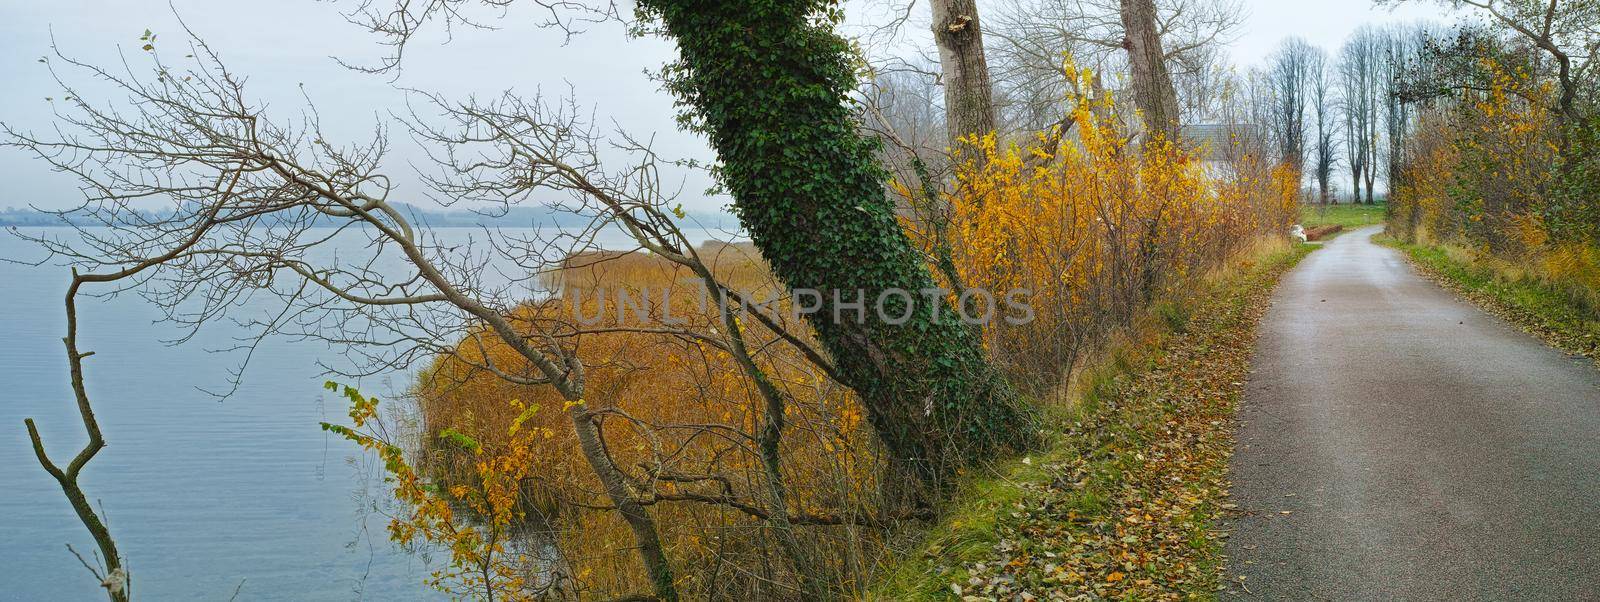 Autumn in the colors of autumn. A photo of sea, road and landscape in autumn